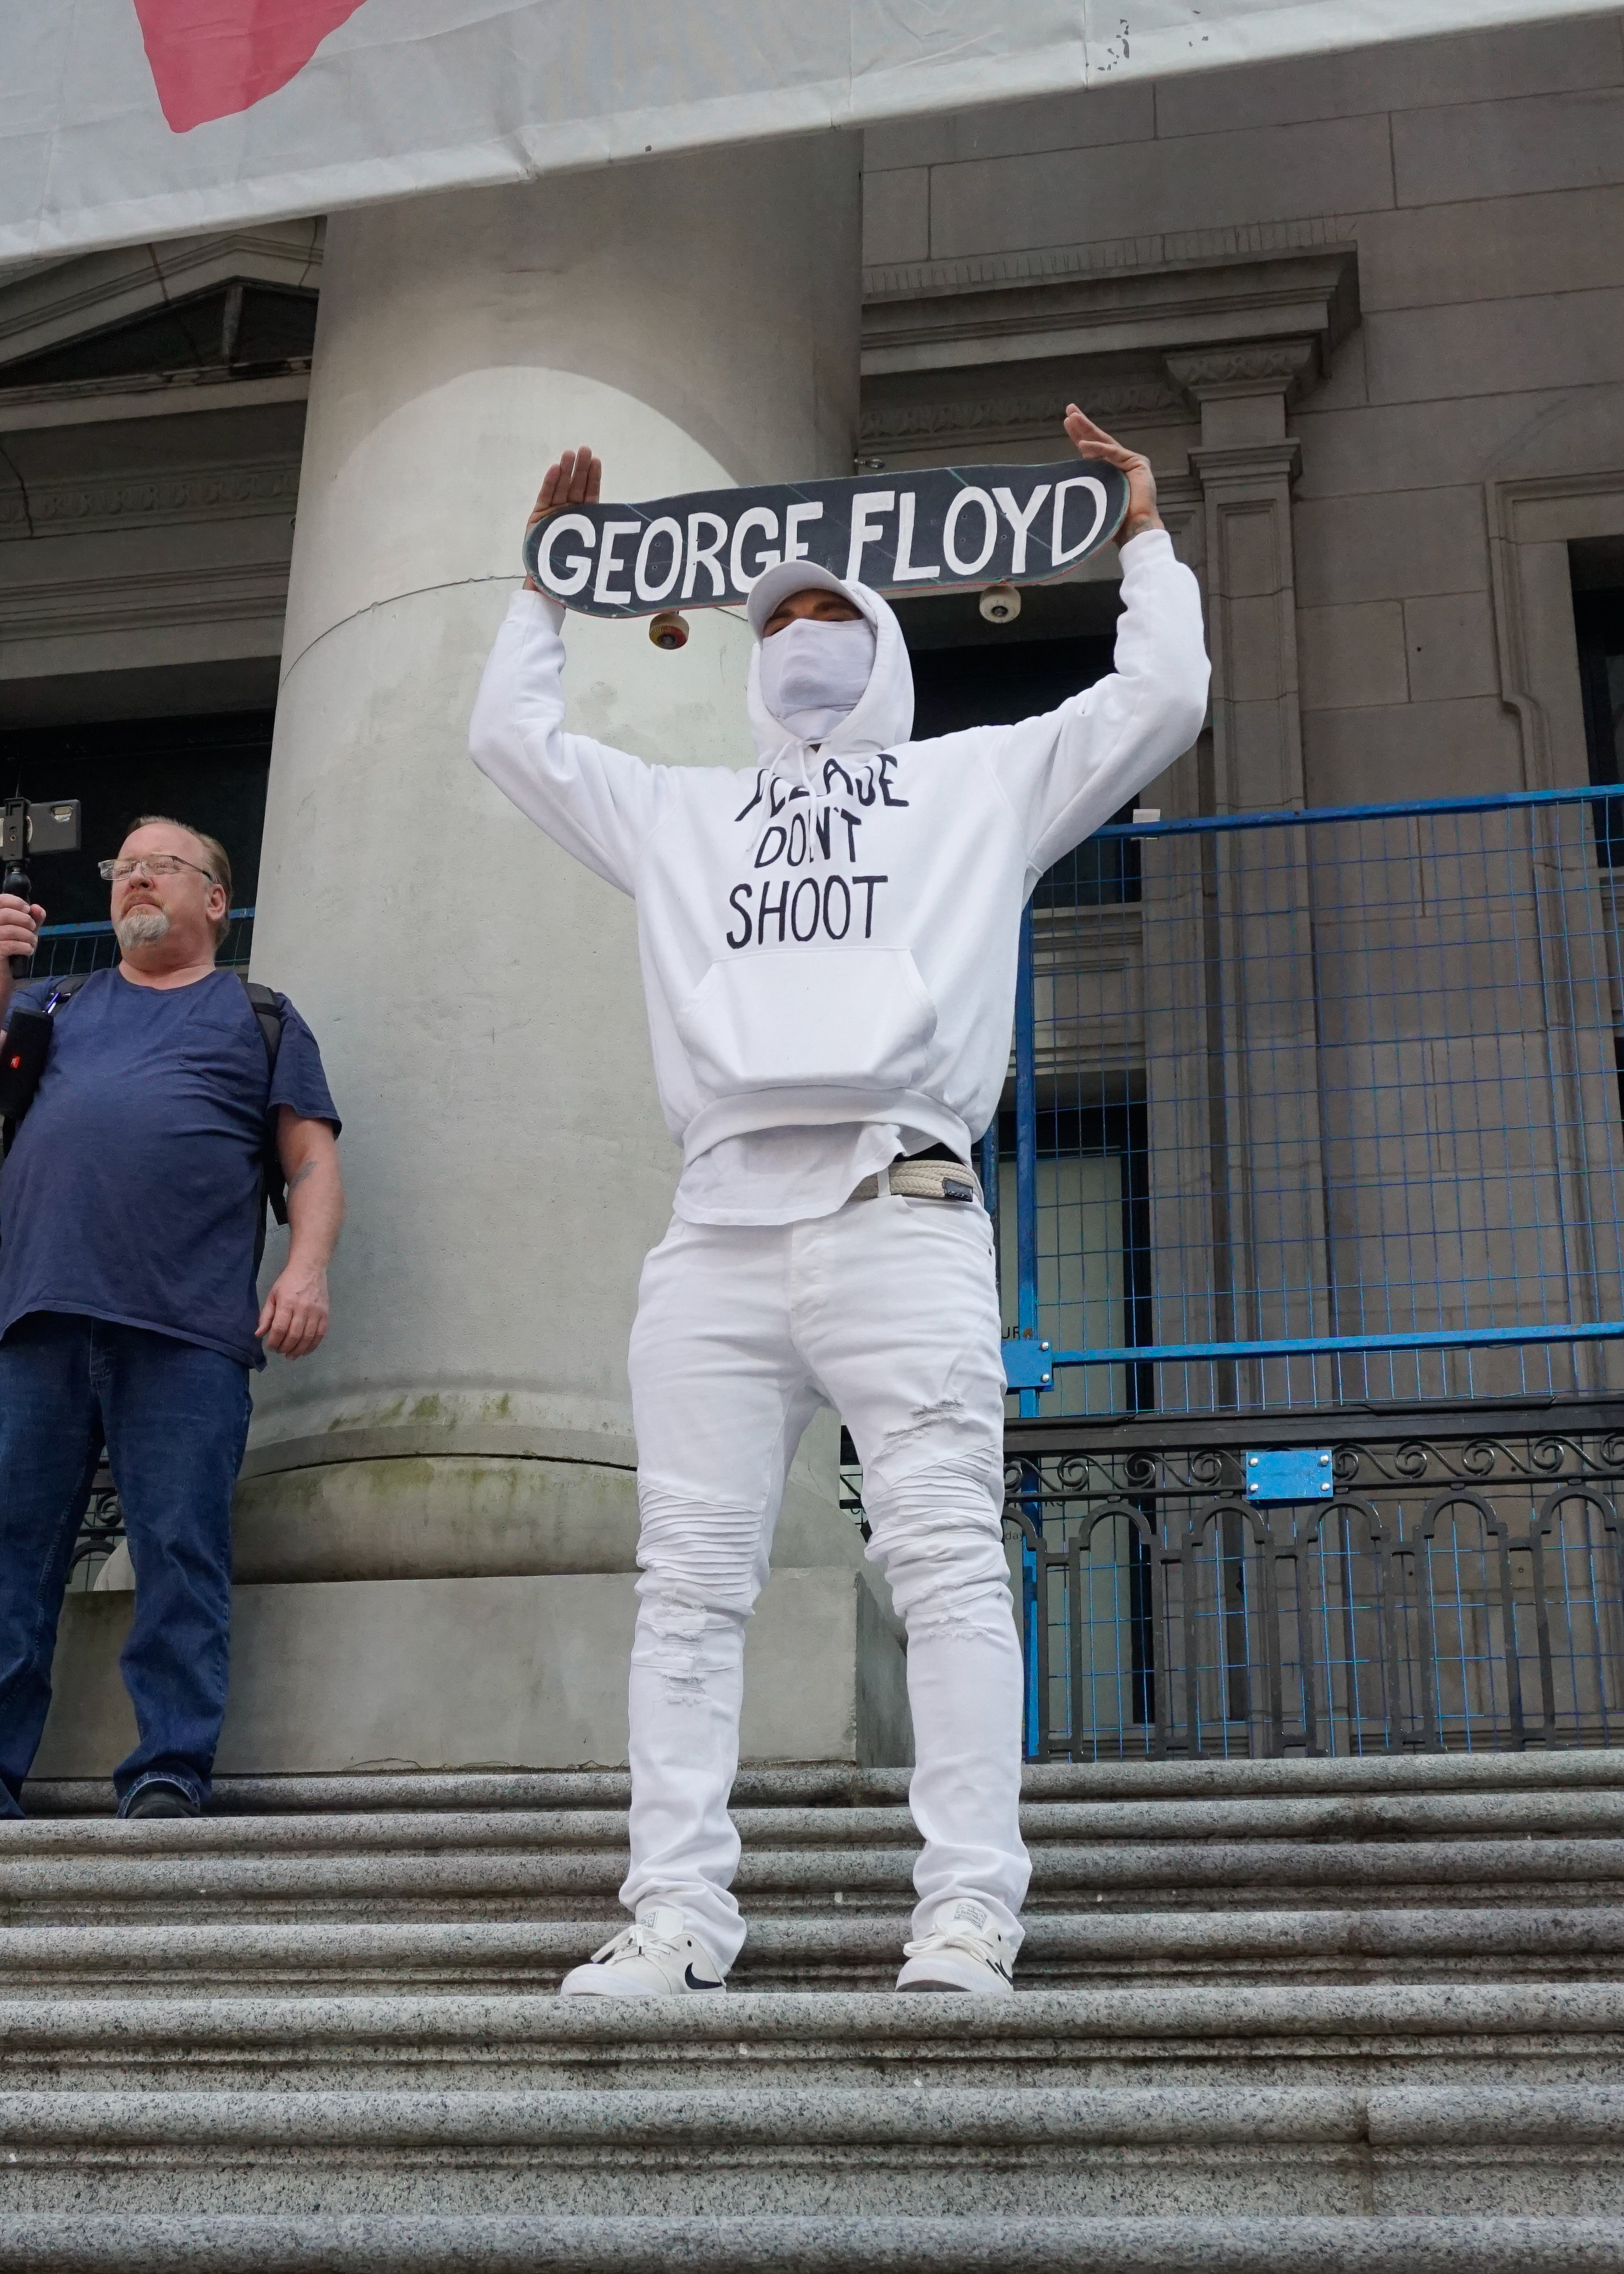 At around 5:30 p.m., protesters held a minute of silence for Floyd.